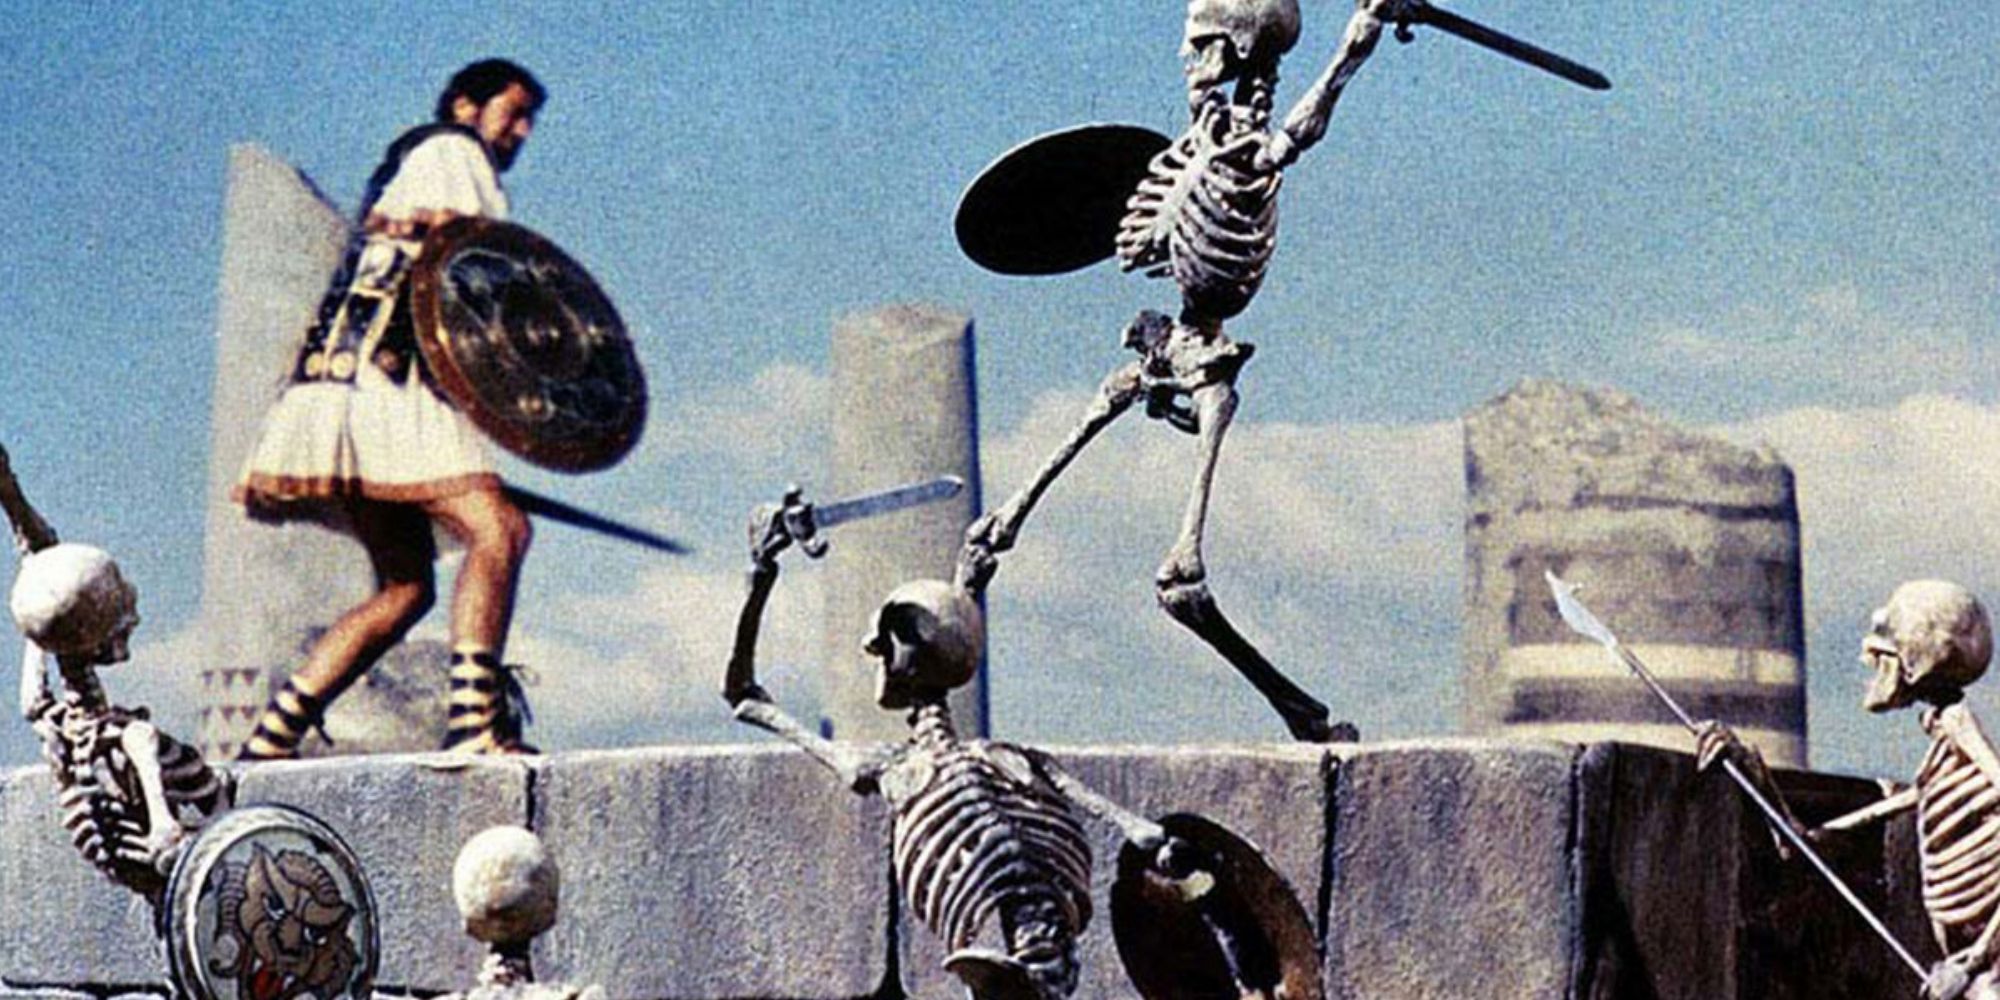 The Argonauts' feud with undead warriors is one of the most iconic fights in film